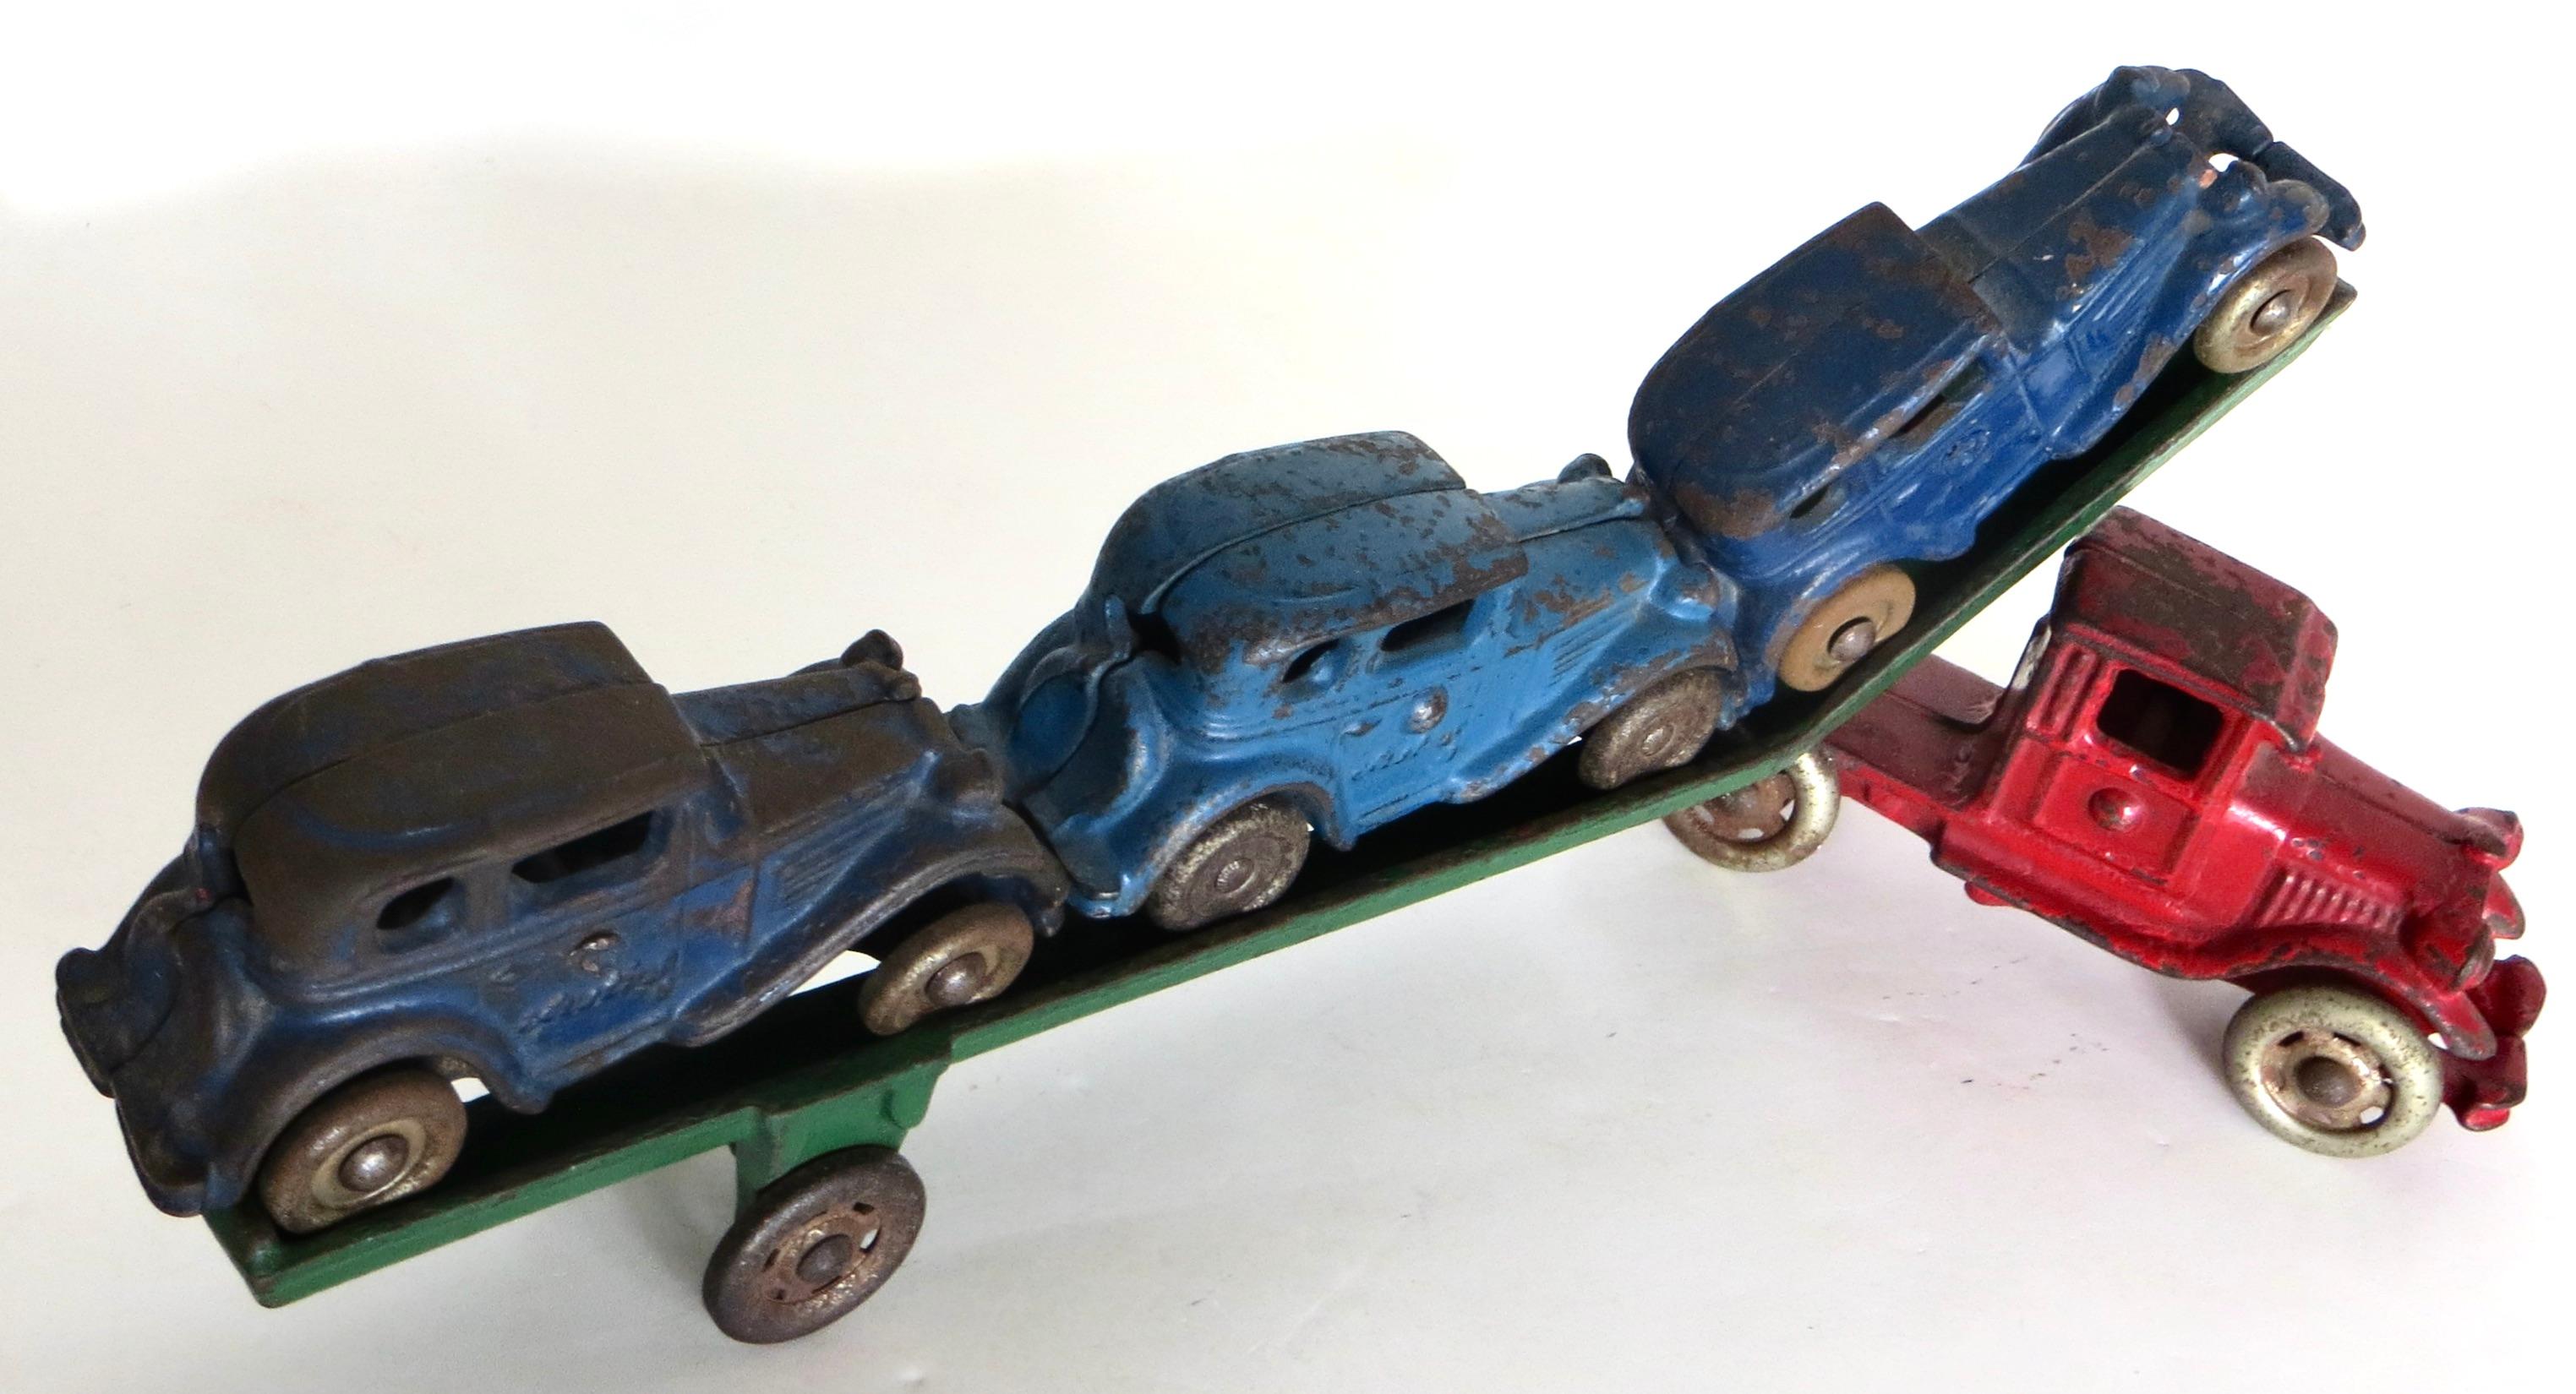 Founded in 1886, the A.C. Williams Toy Company in Ravenna, Ohio, manufactured this toy circa 1930. This cast iron truck car carrier loaded with three blue 